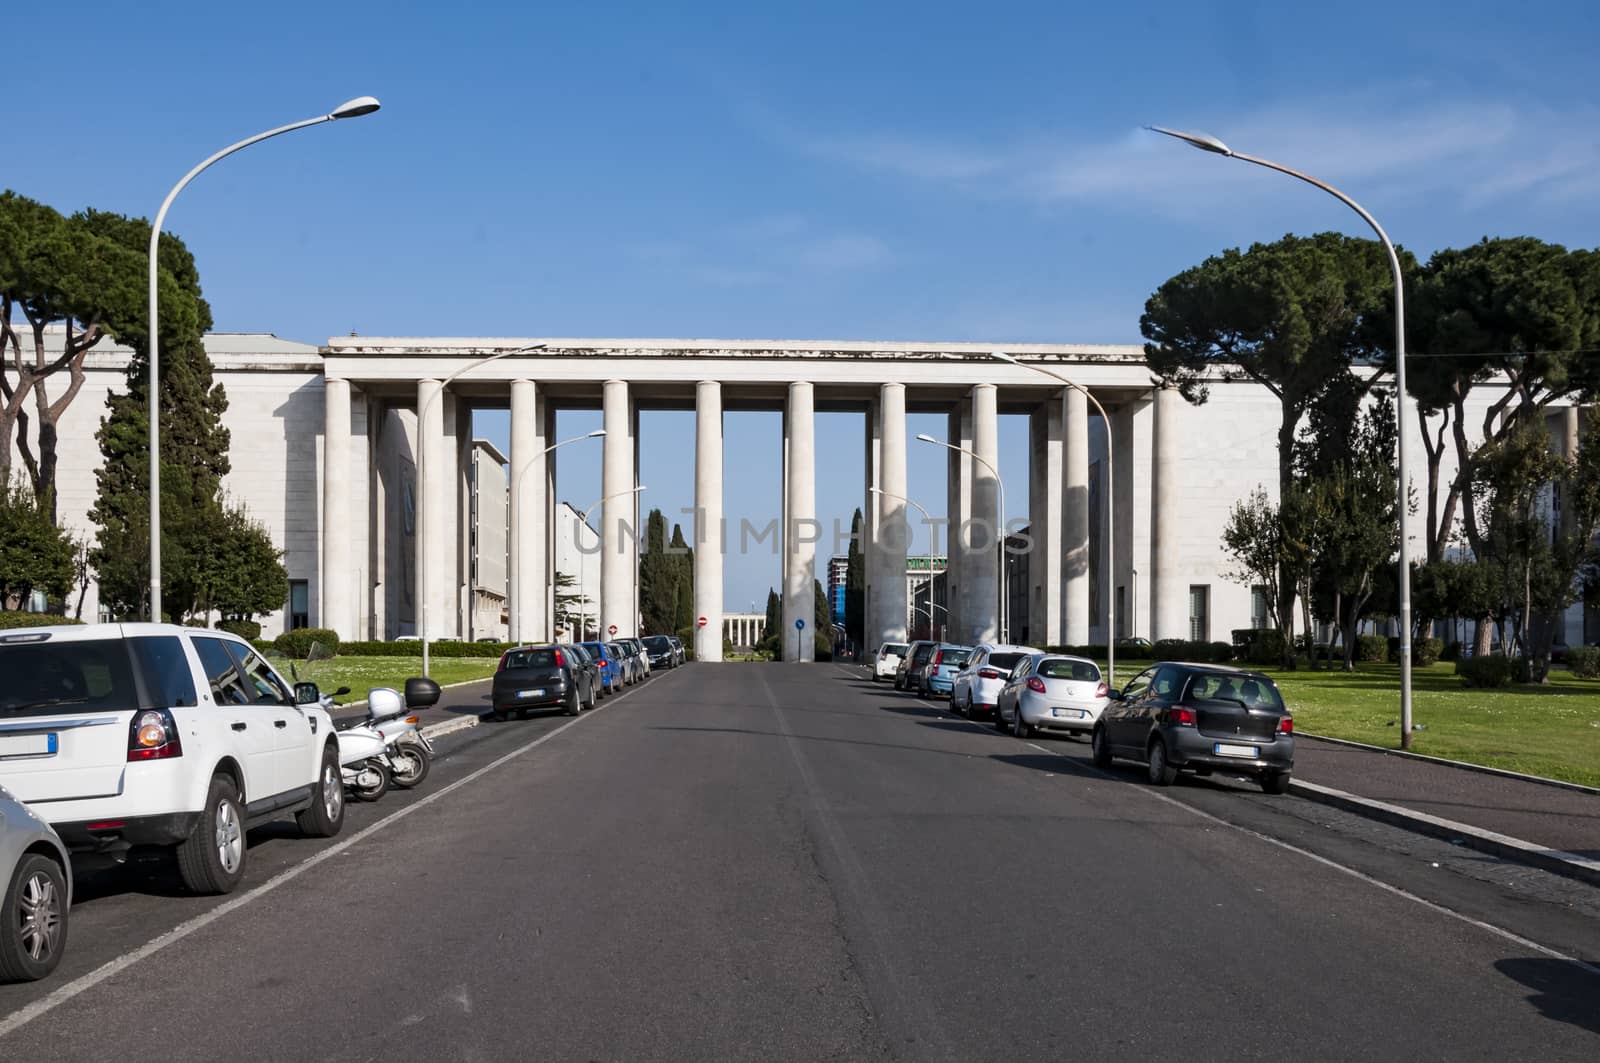 modern architecture in Eur district in Rome, Italy